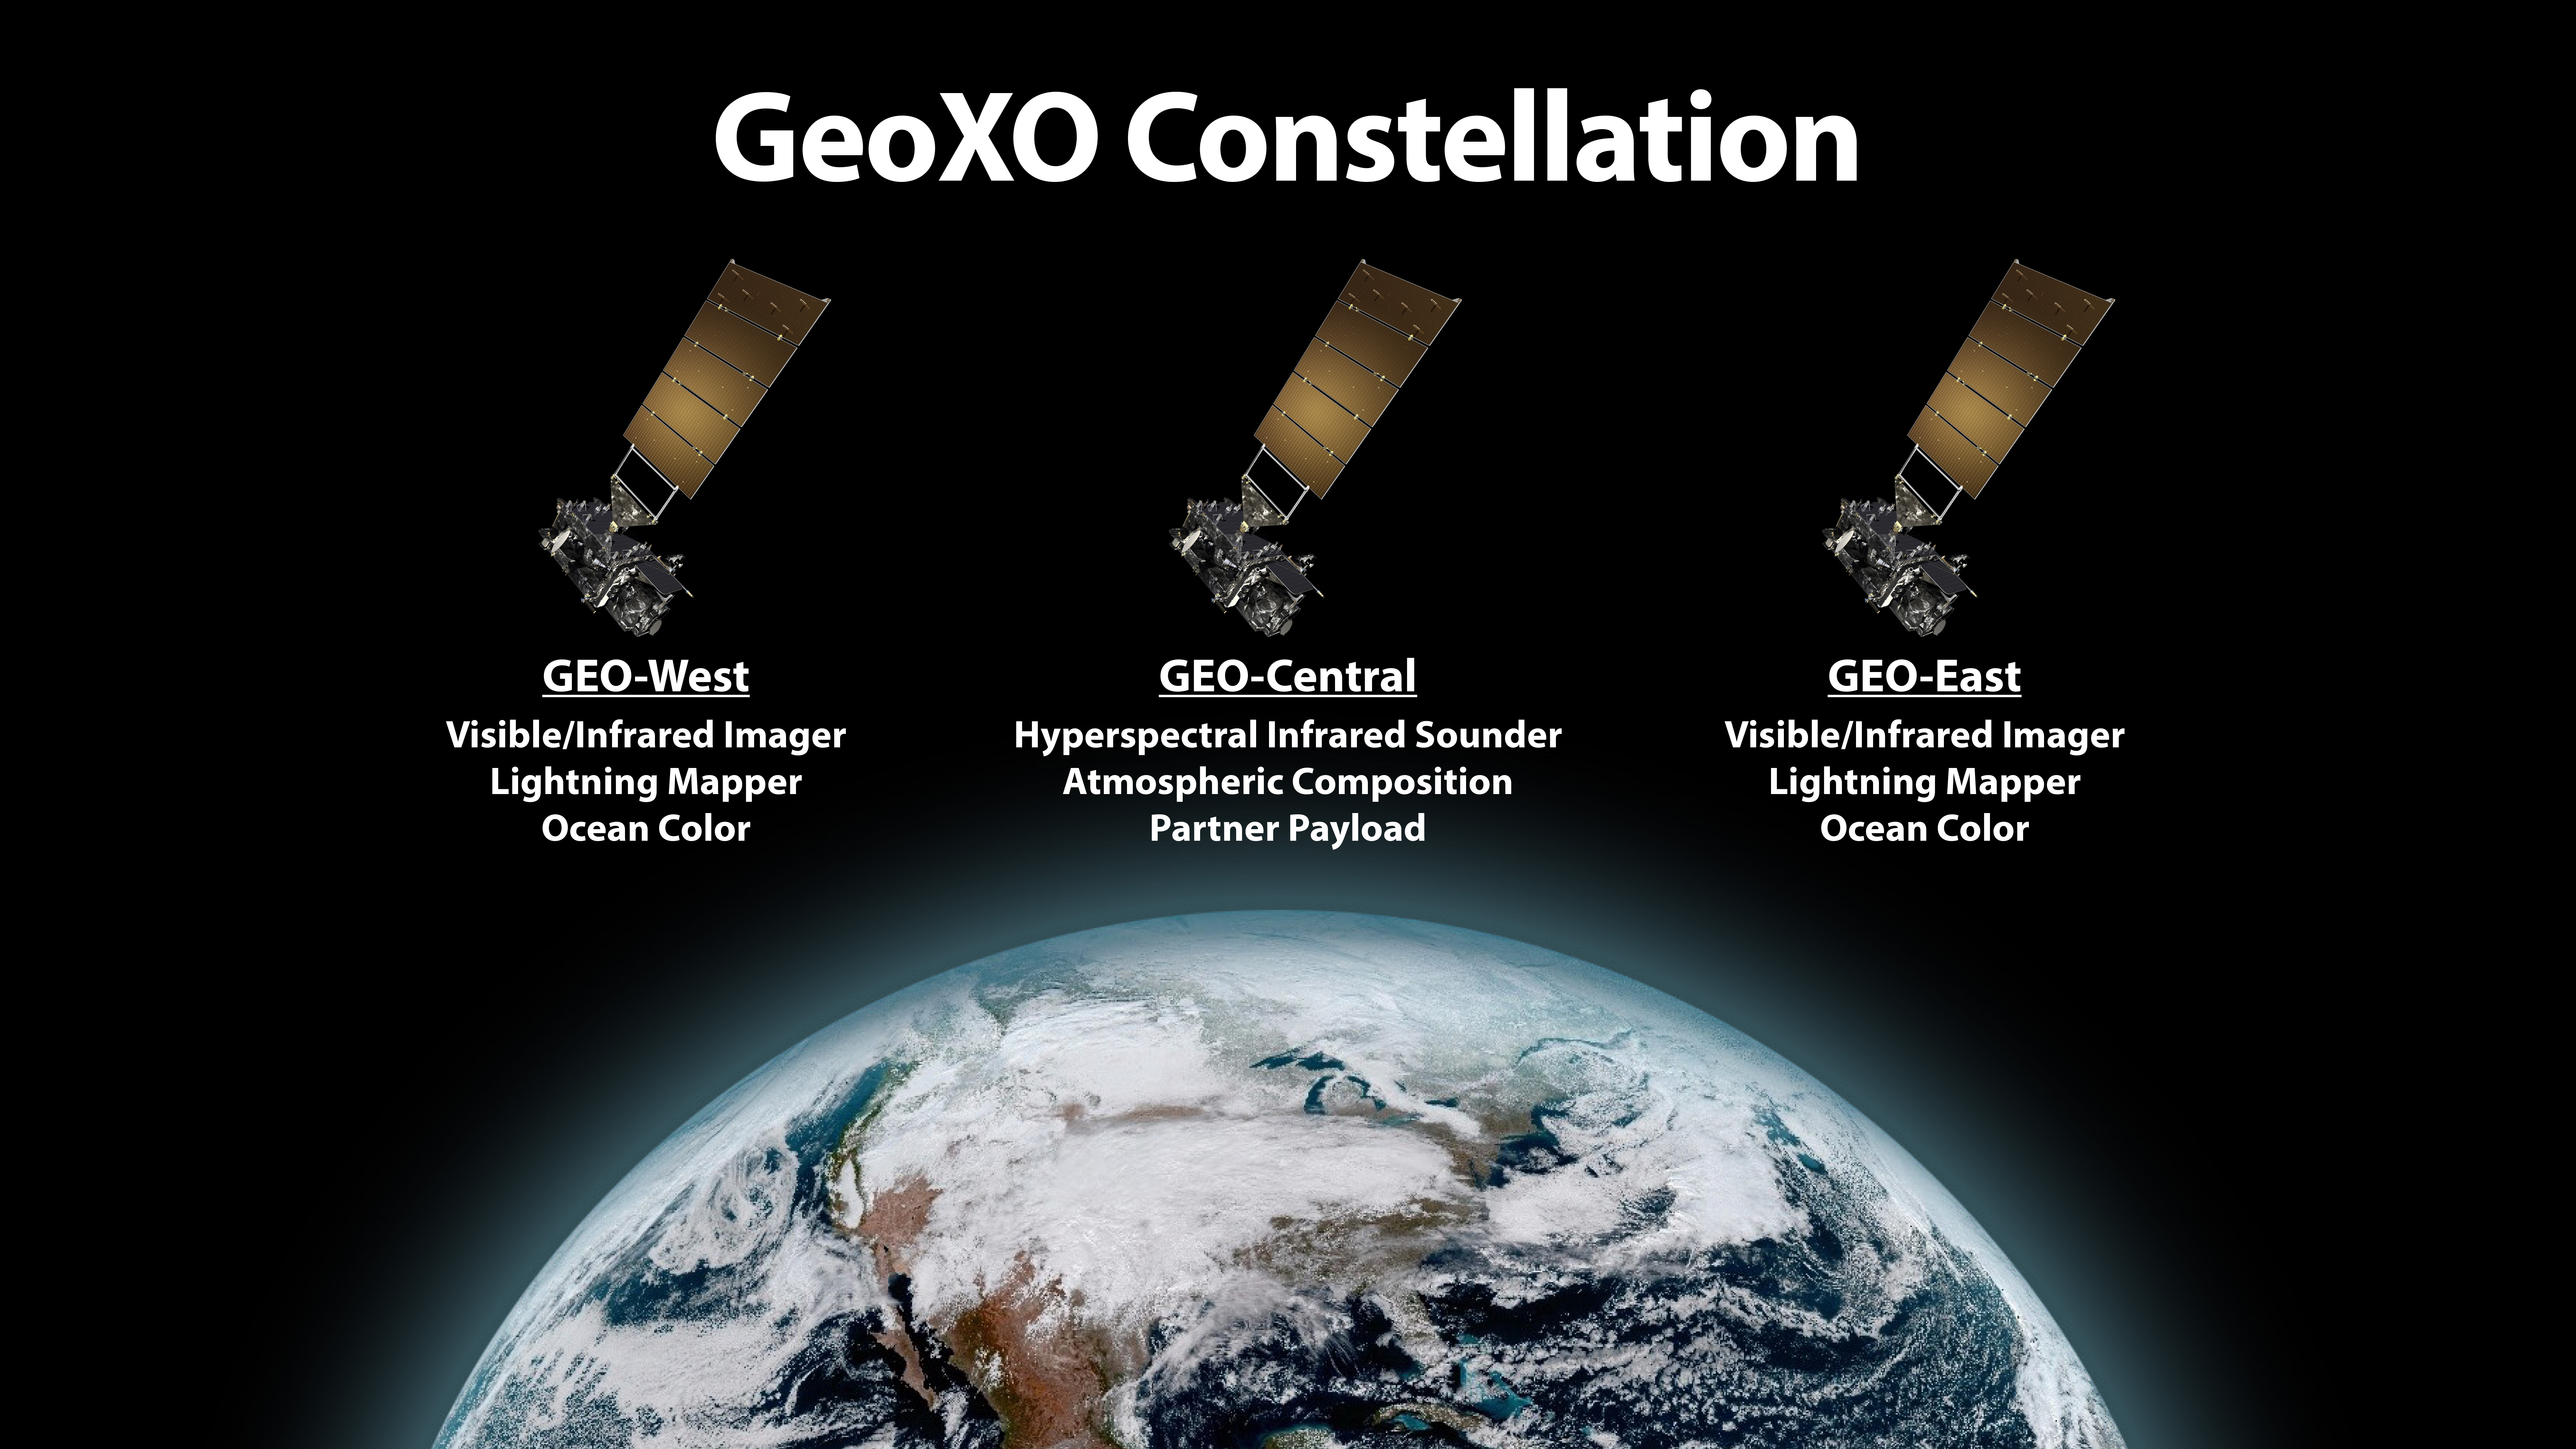 NASA Awards Contracts for NOAA GeoXO Spacecraft Phase A Study